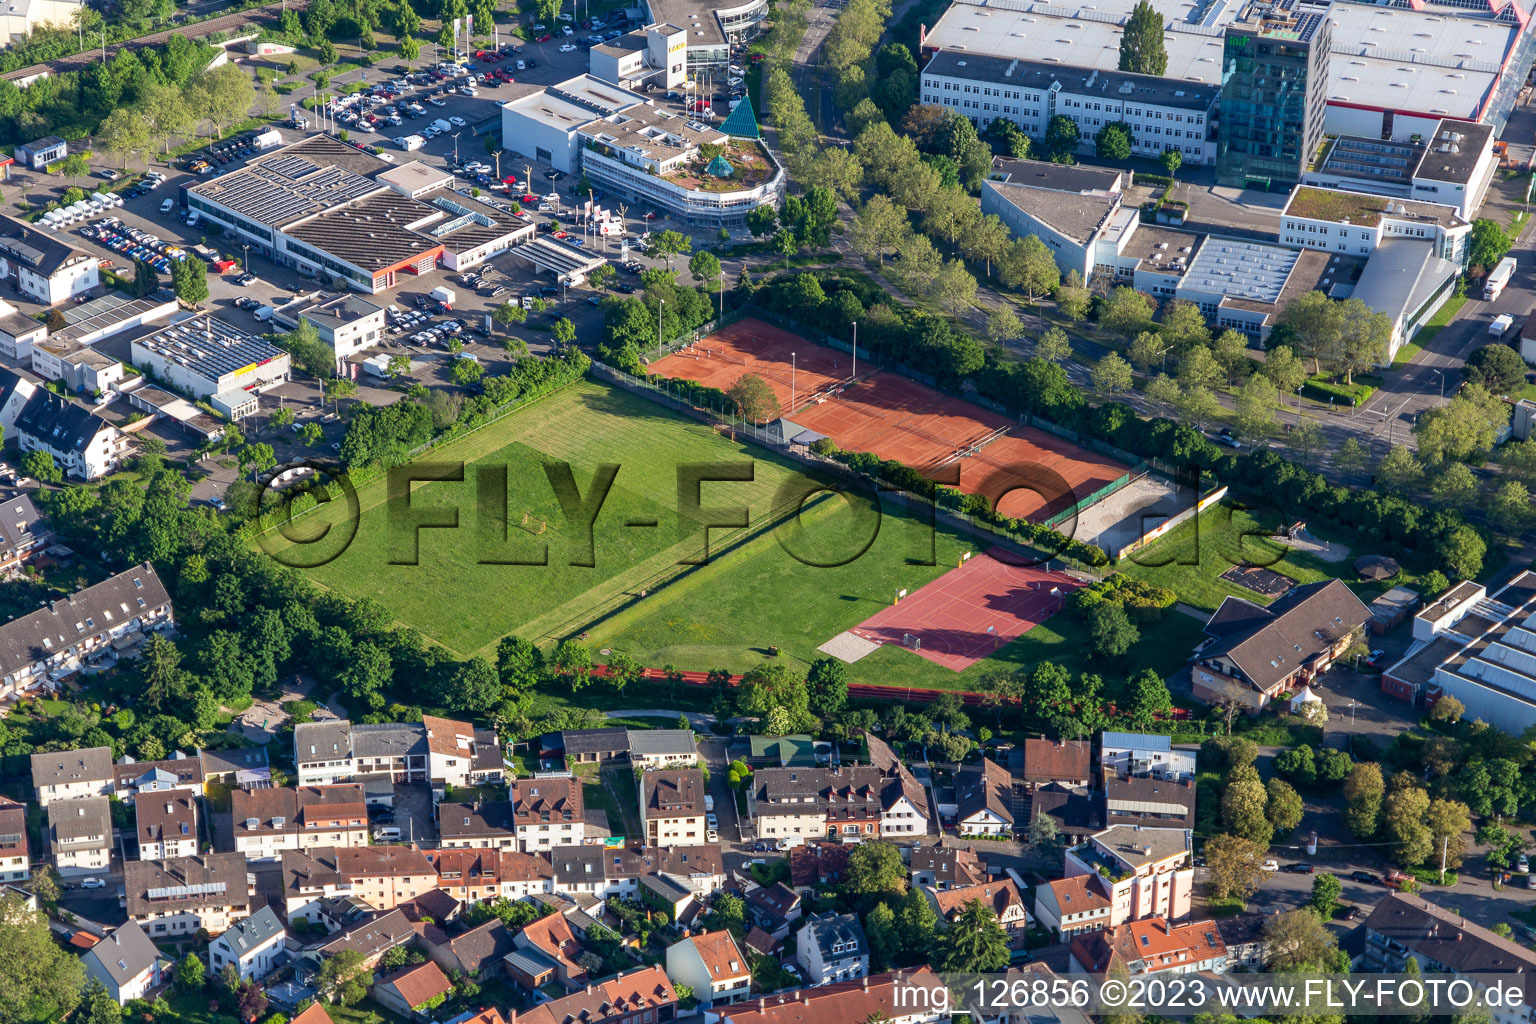 Aerial view of TuS Rintheim in the district Rintheim in Karlsruhe in the state Baden-Wuerttemberg, Germany